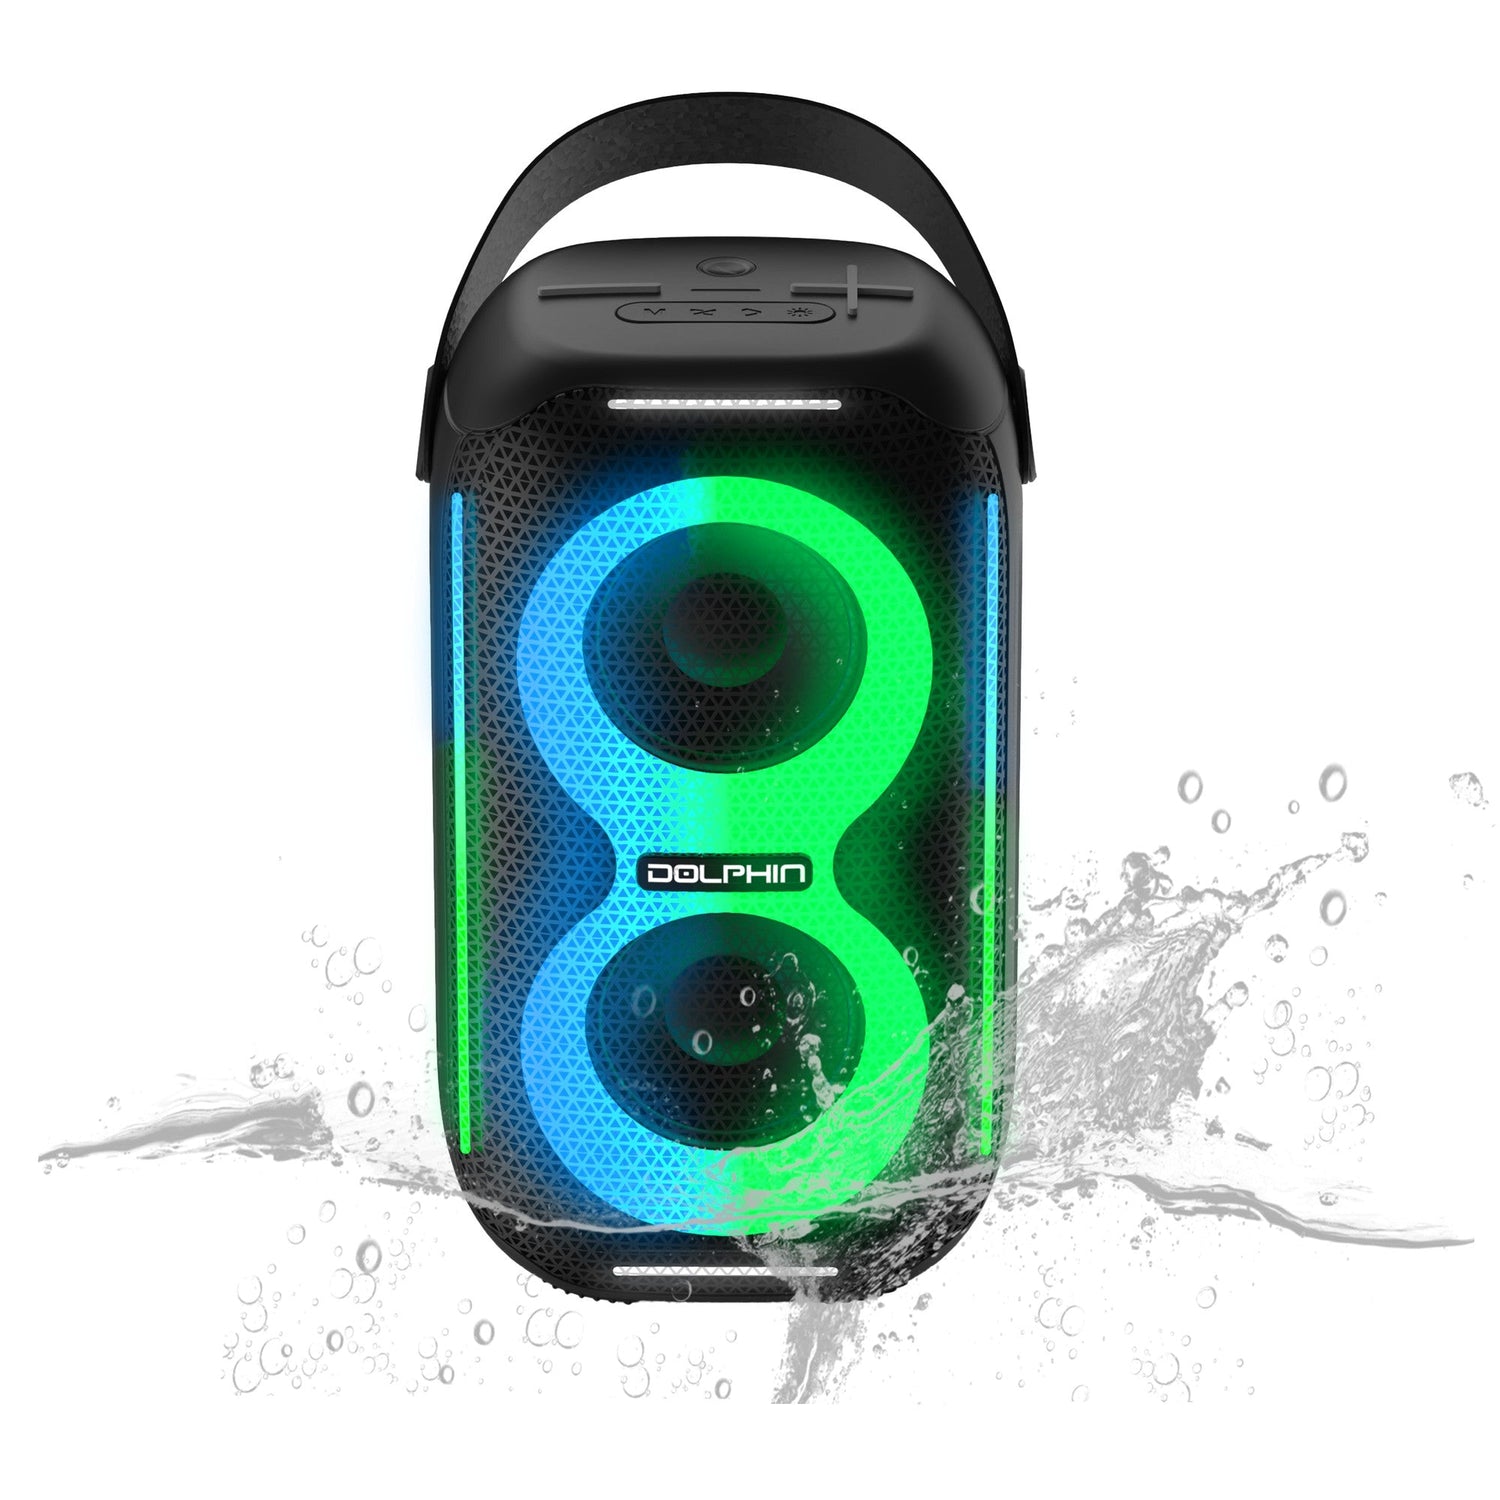 Dolphin New S20 Waterproof Portable Party Speaker - Compact Design, HD Lightshow, Perfect for Beach, Pools, Showers, Camping, All Outdoors - Top ElectrosSpeakersS20-Black810059431546